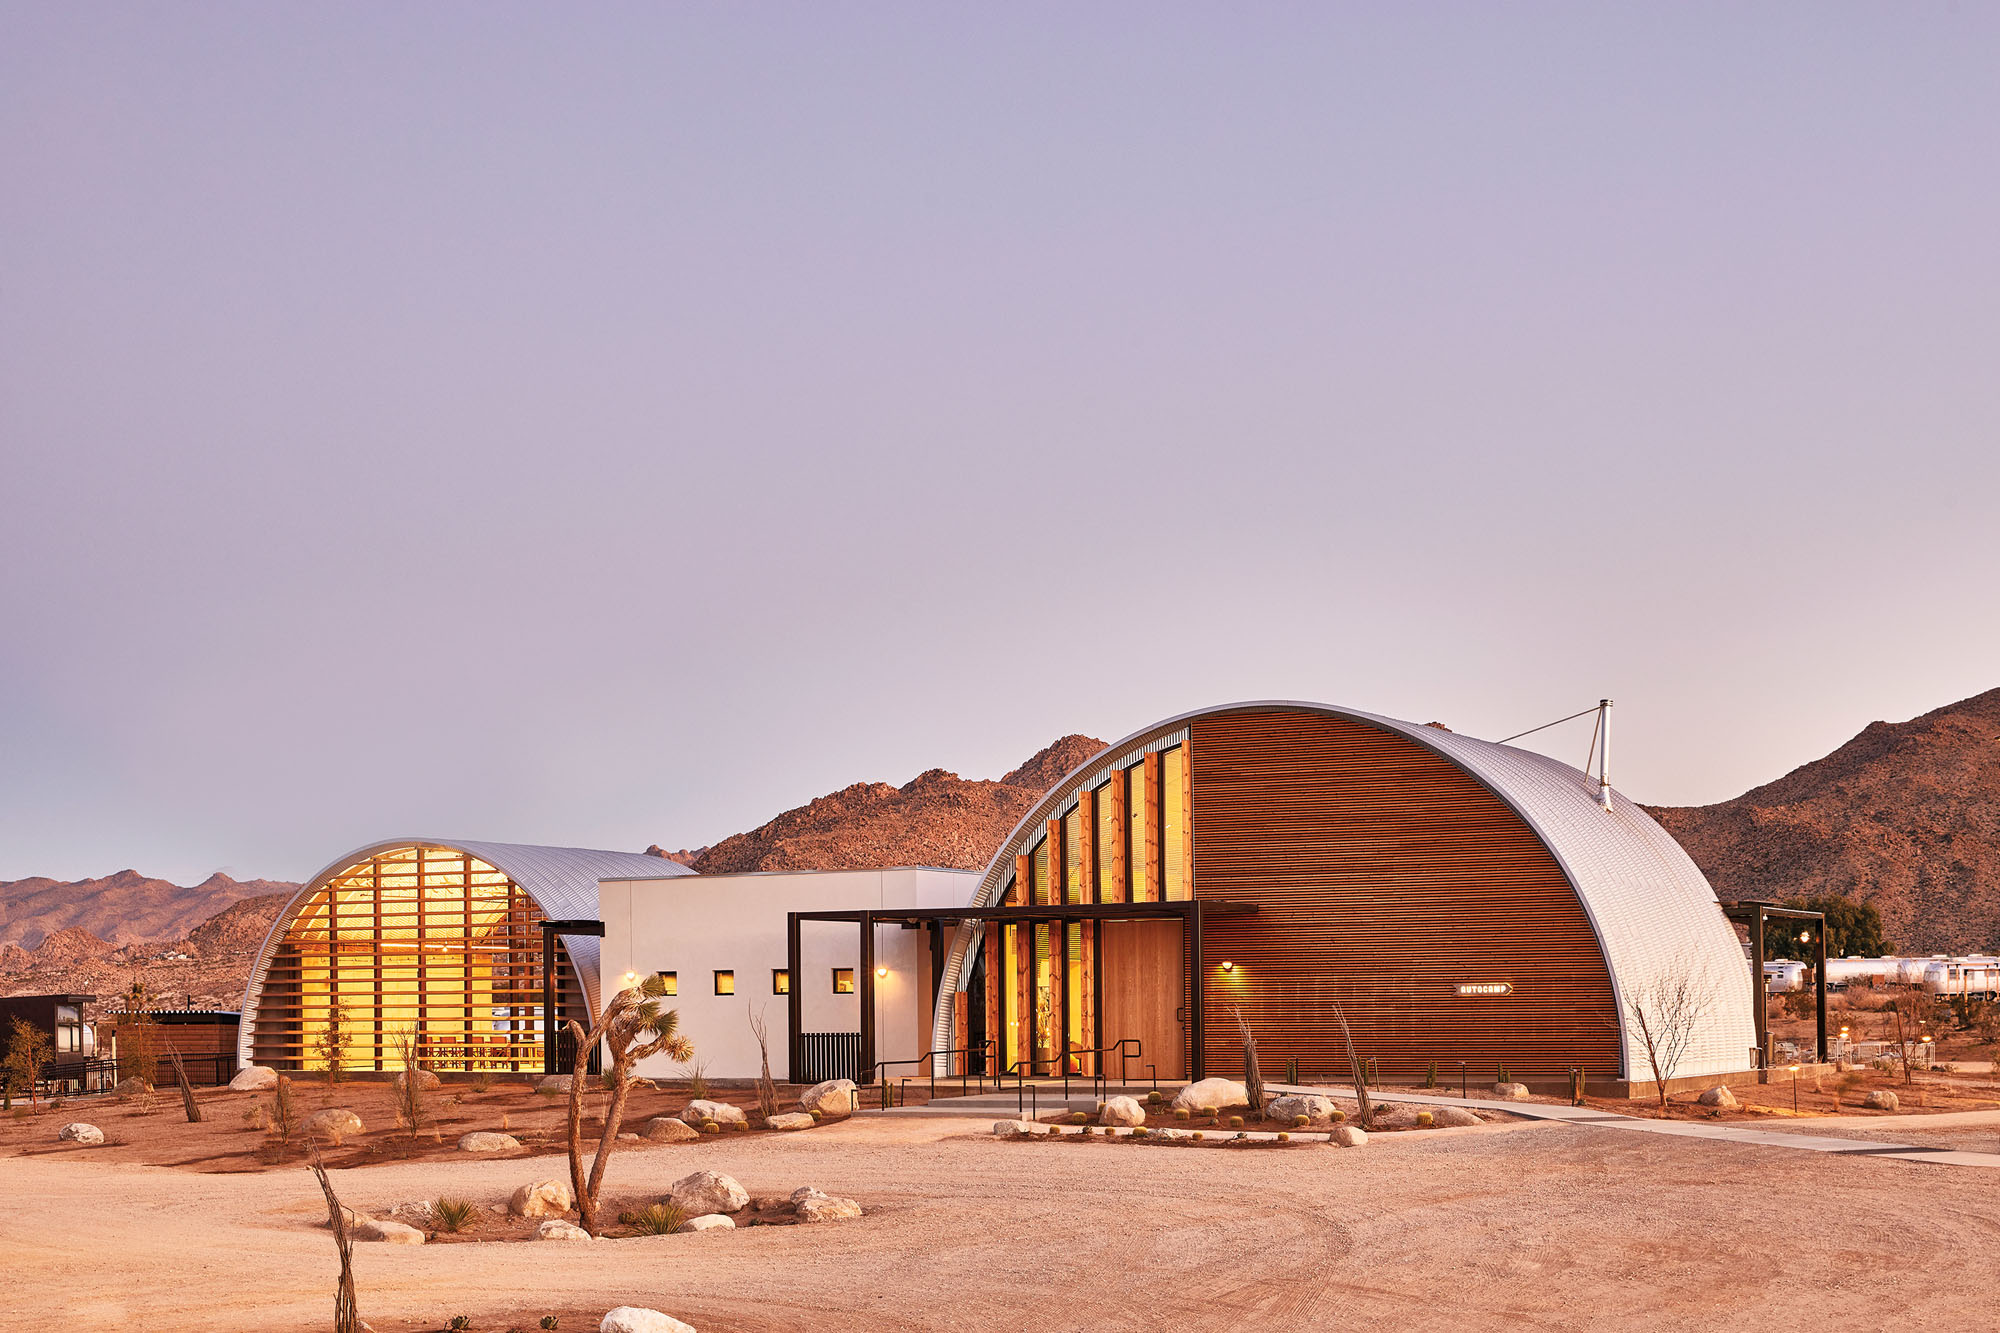 a photograph of two quonset huts transformed into hotels